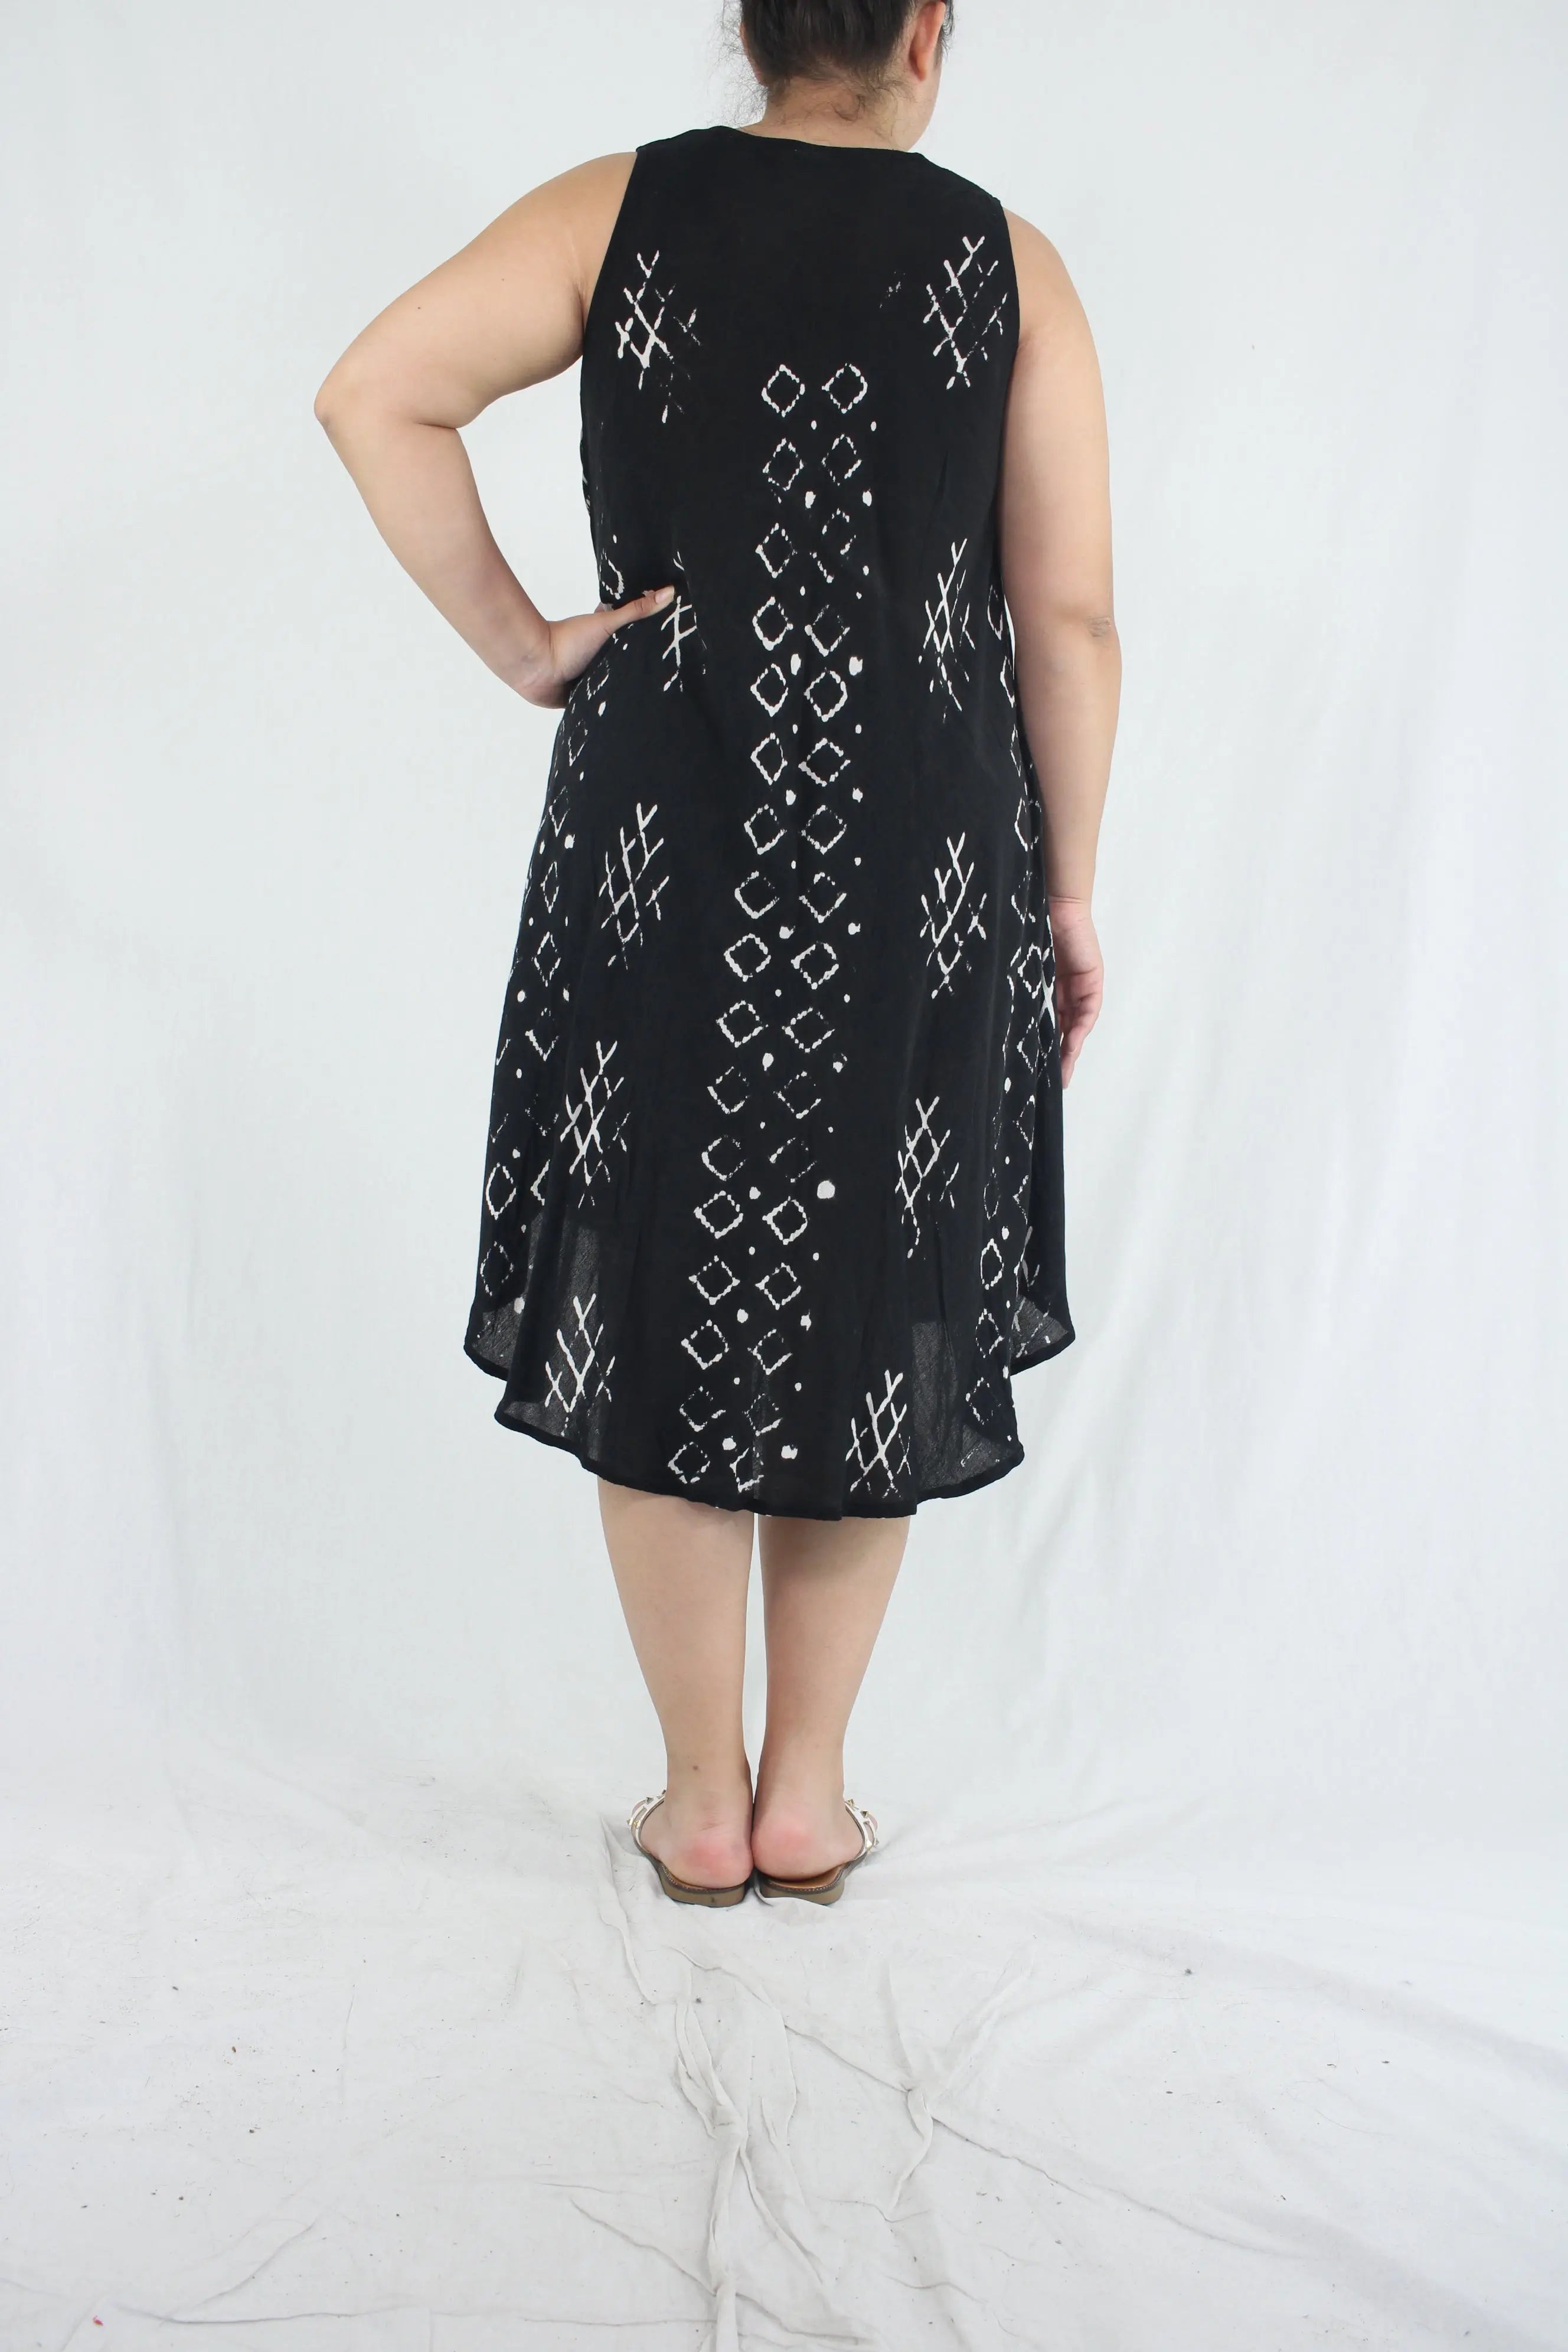 Unknown - Black Patterned Dress- ThriftTale.com - Vintage and second handclothing